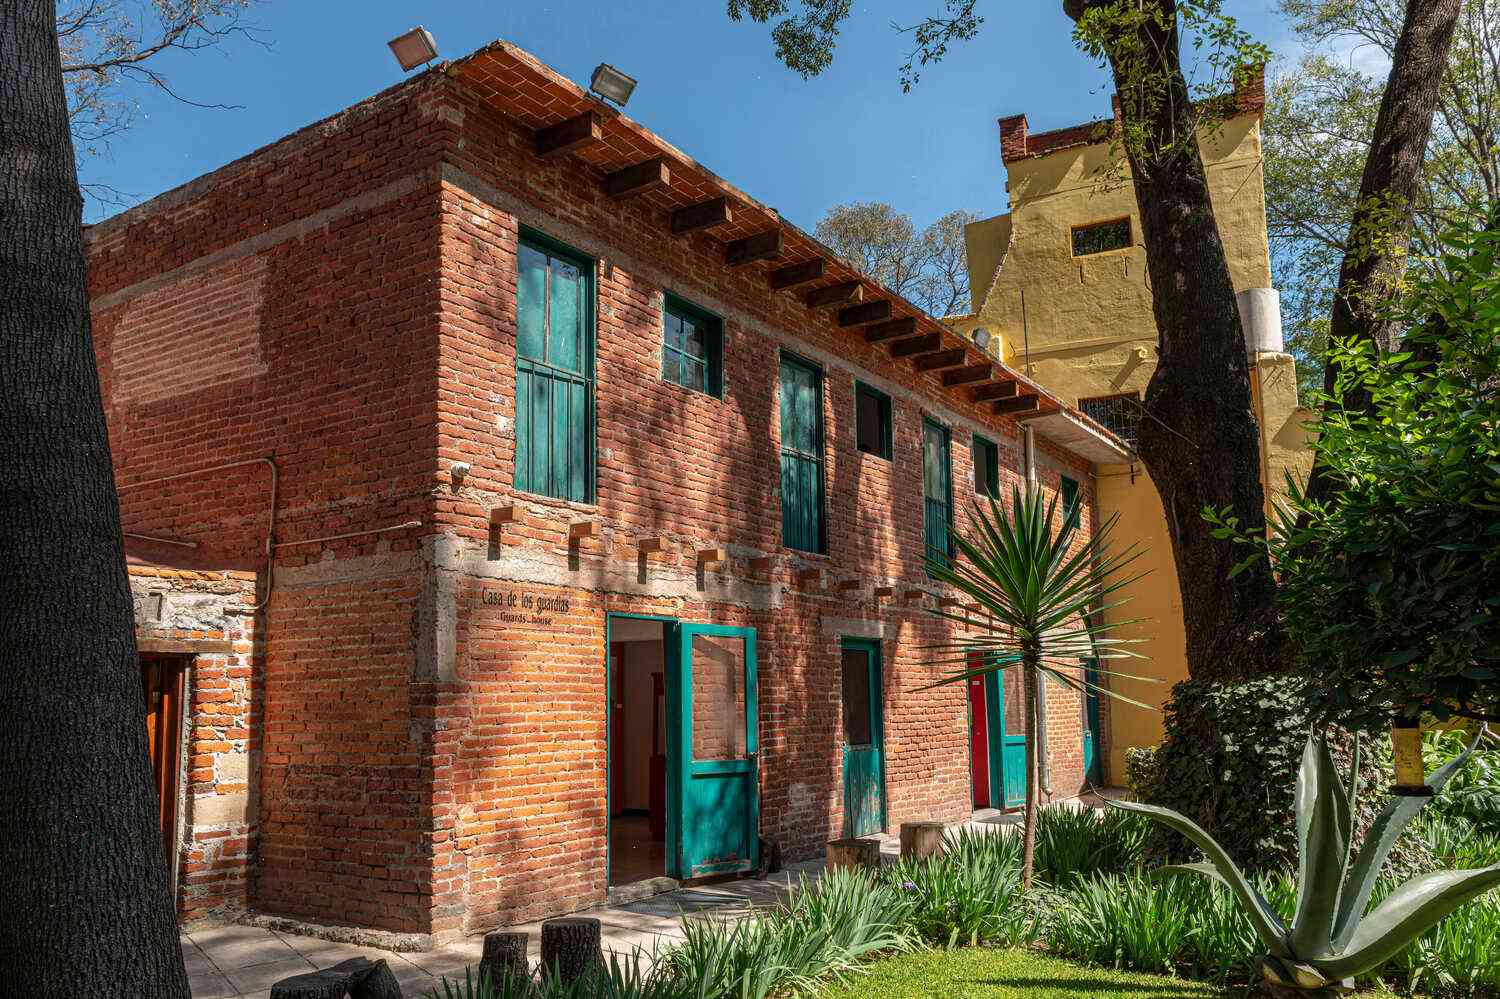 Mexico City’s House Museums